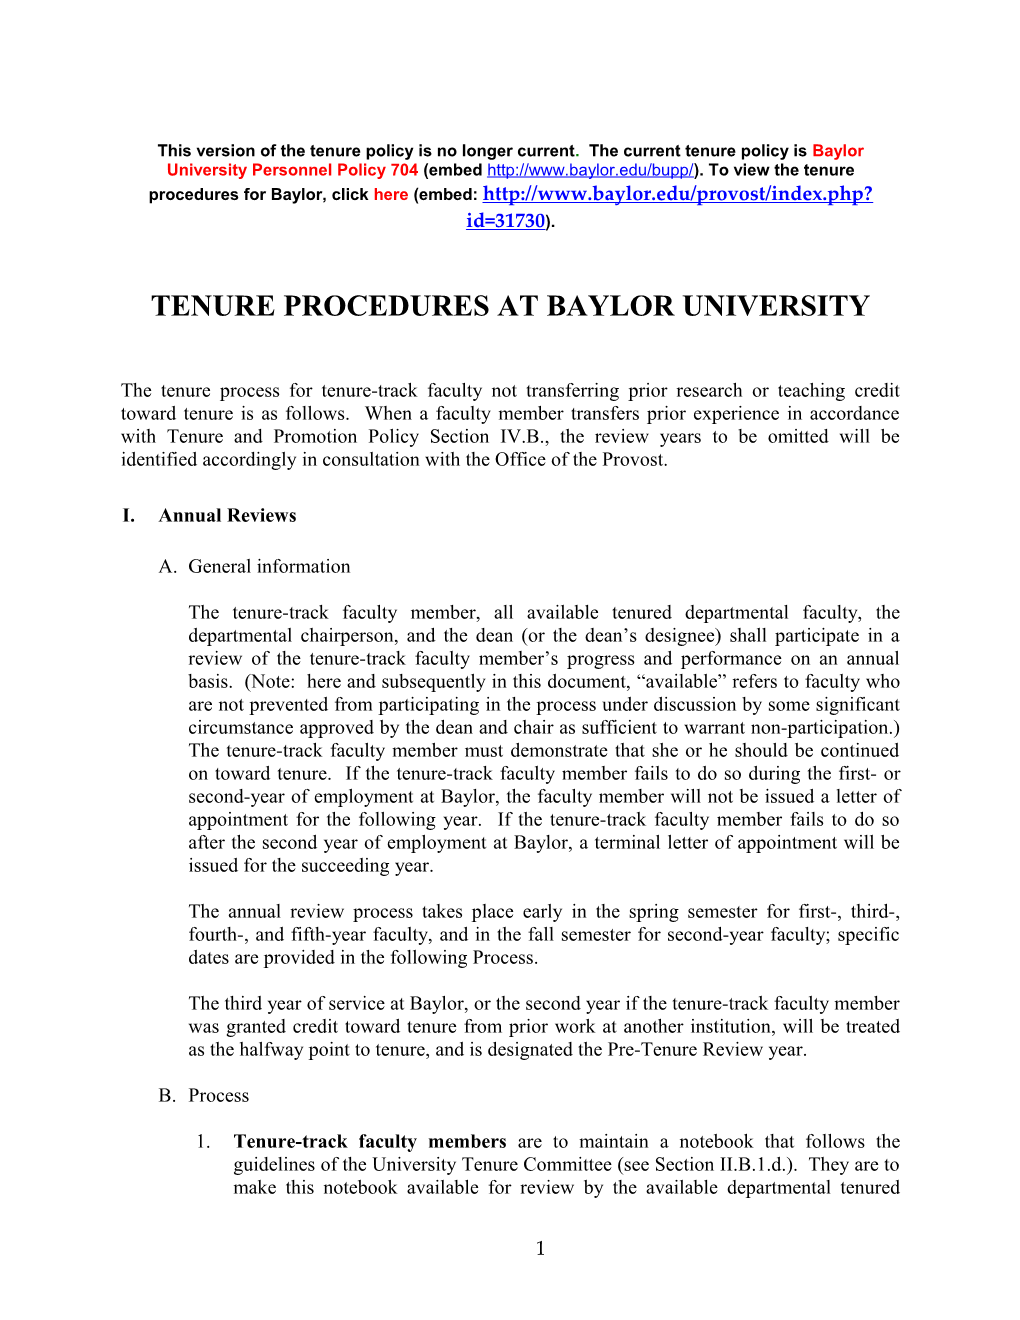 Tenure Policy and Procedures of Baylor University